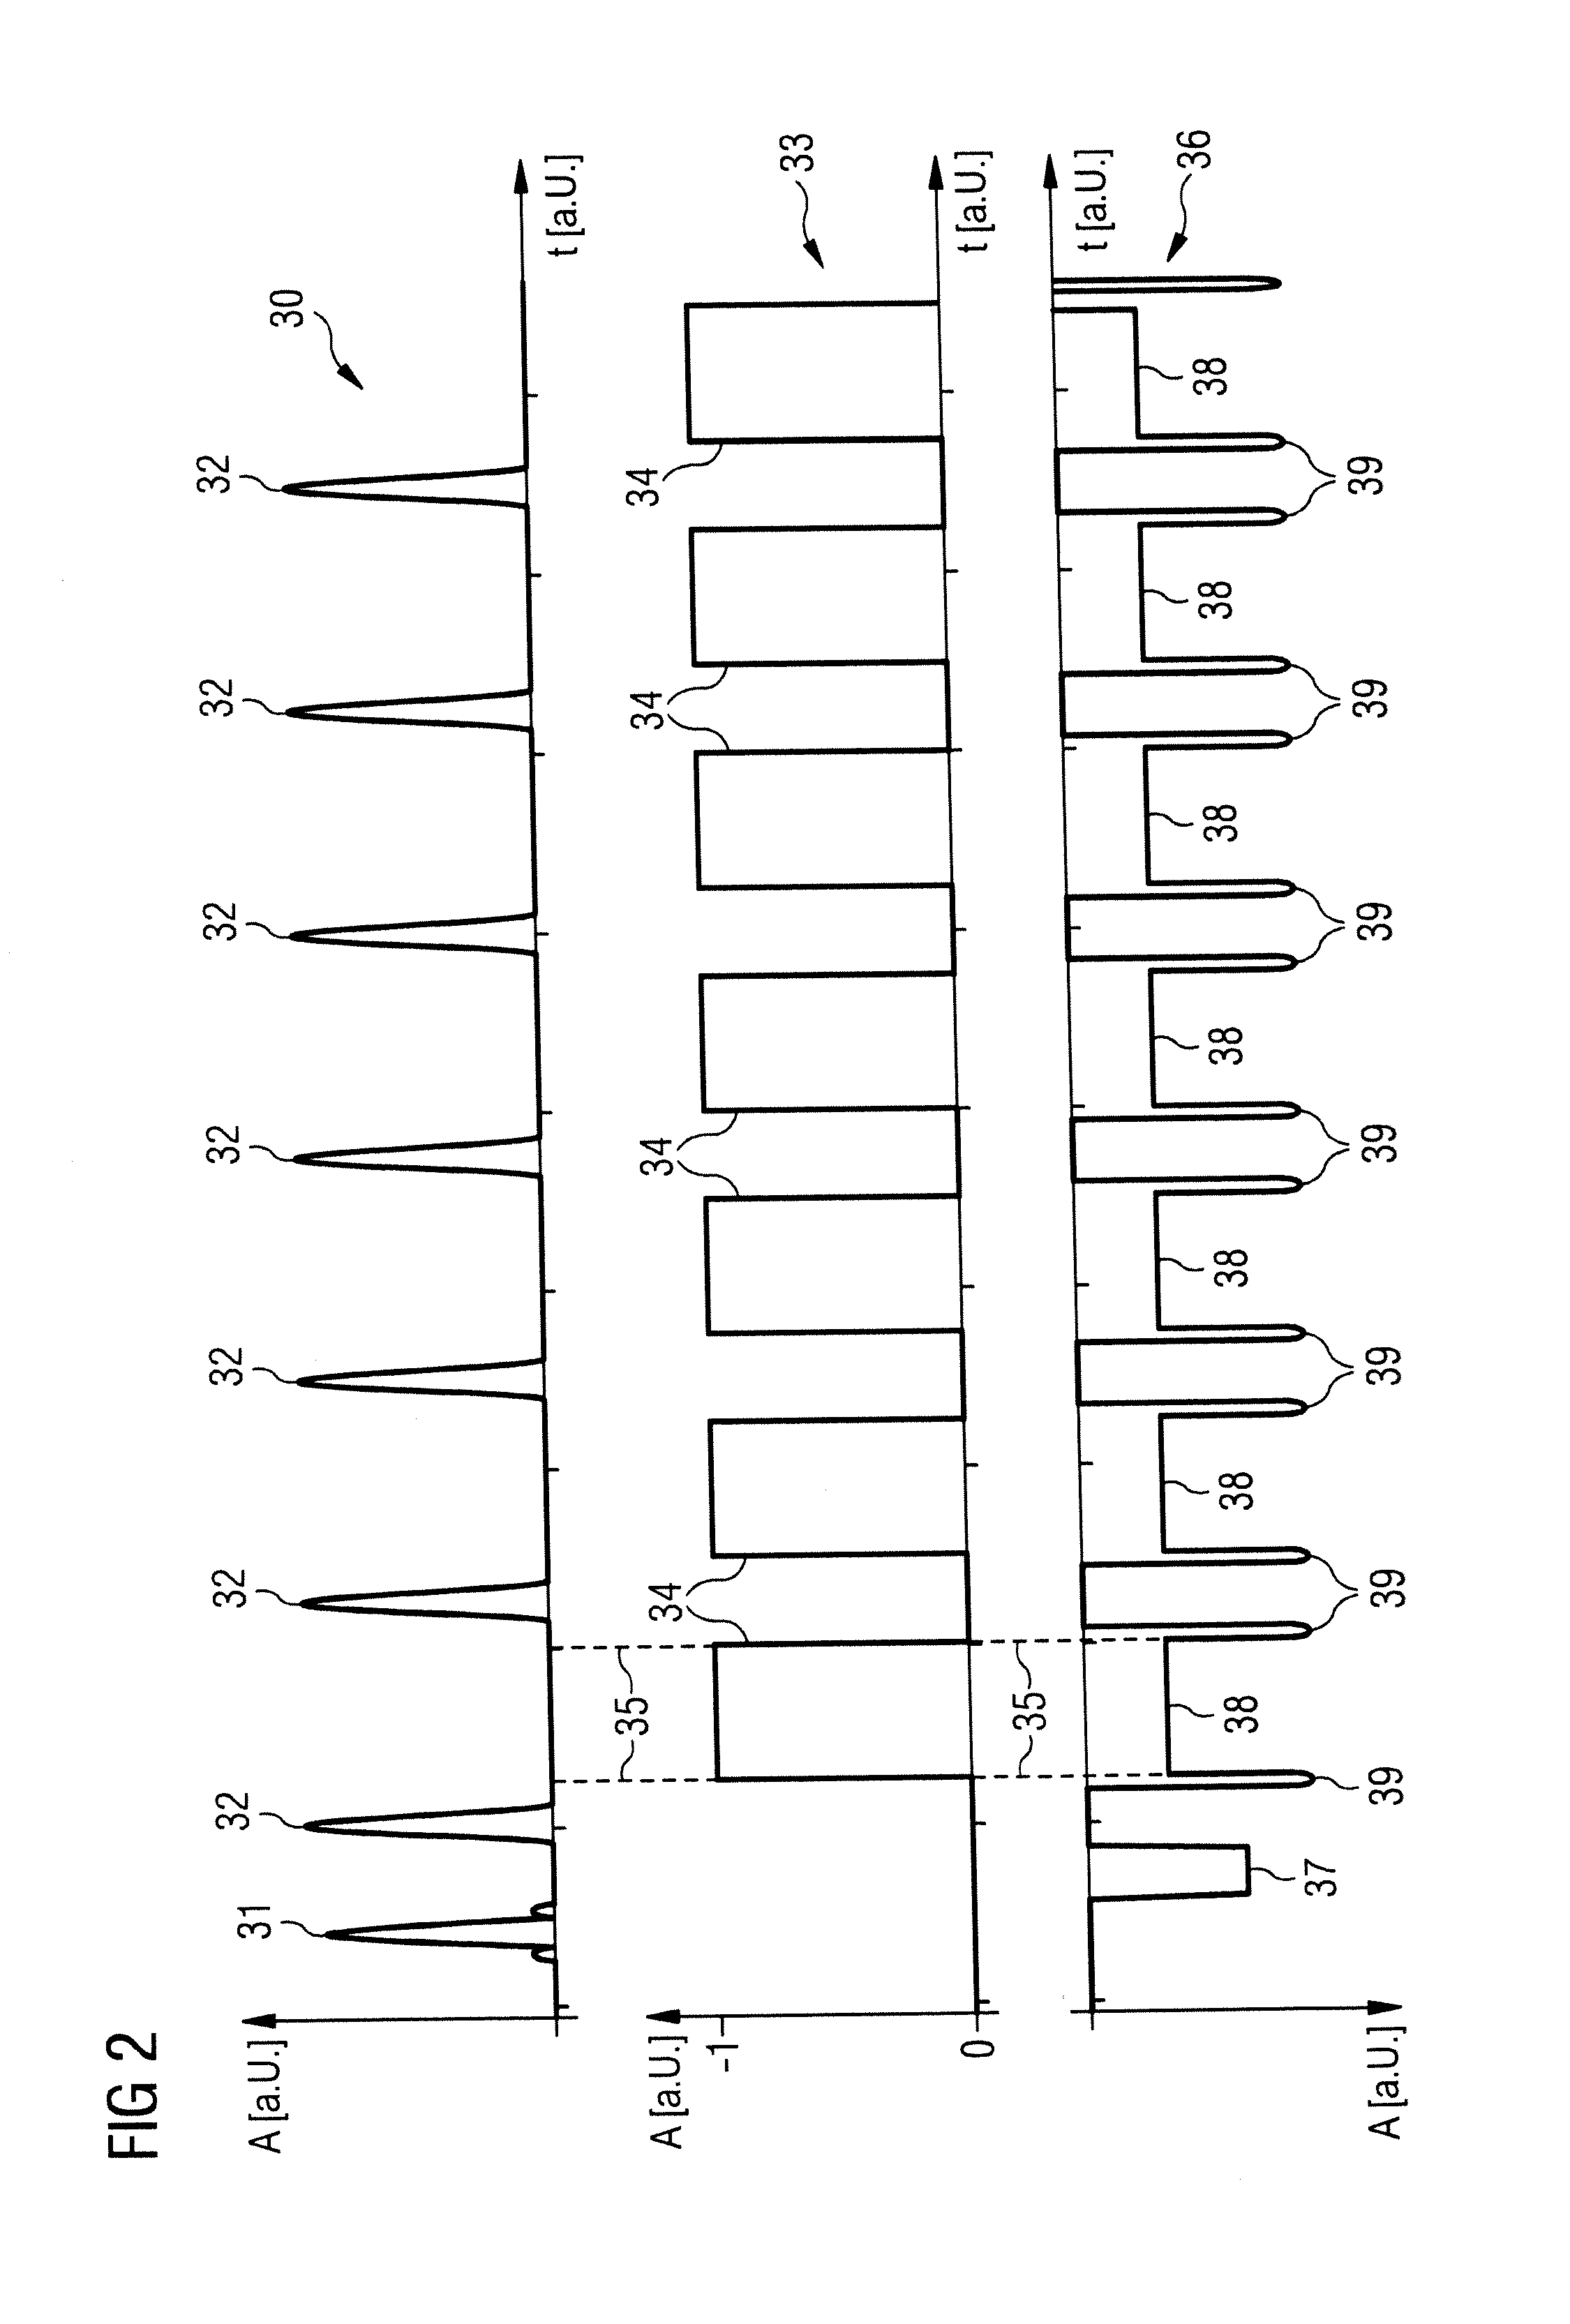 Method and apparatus for optimization of a pulse sequence for a magnetic resonance system